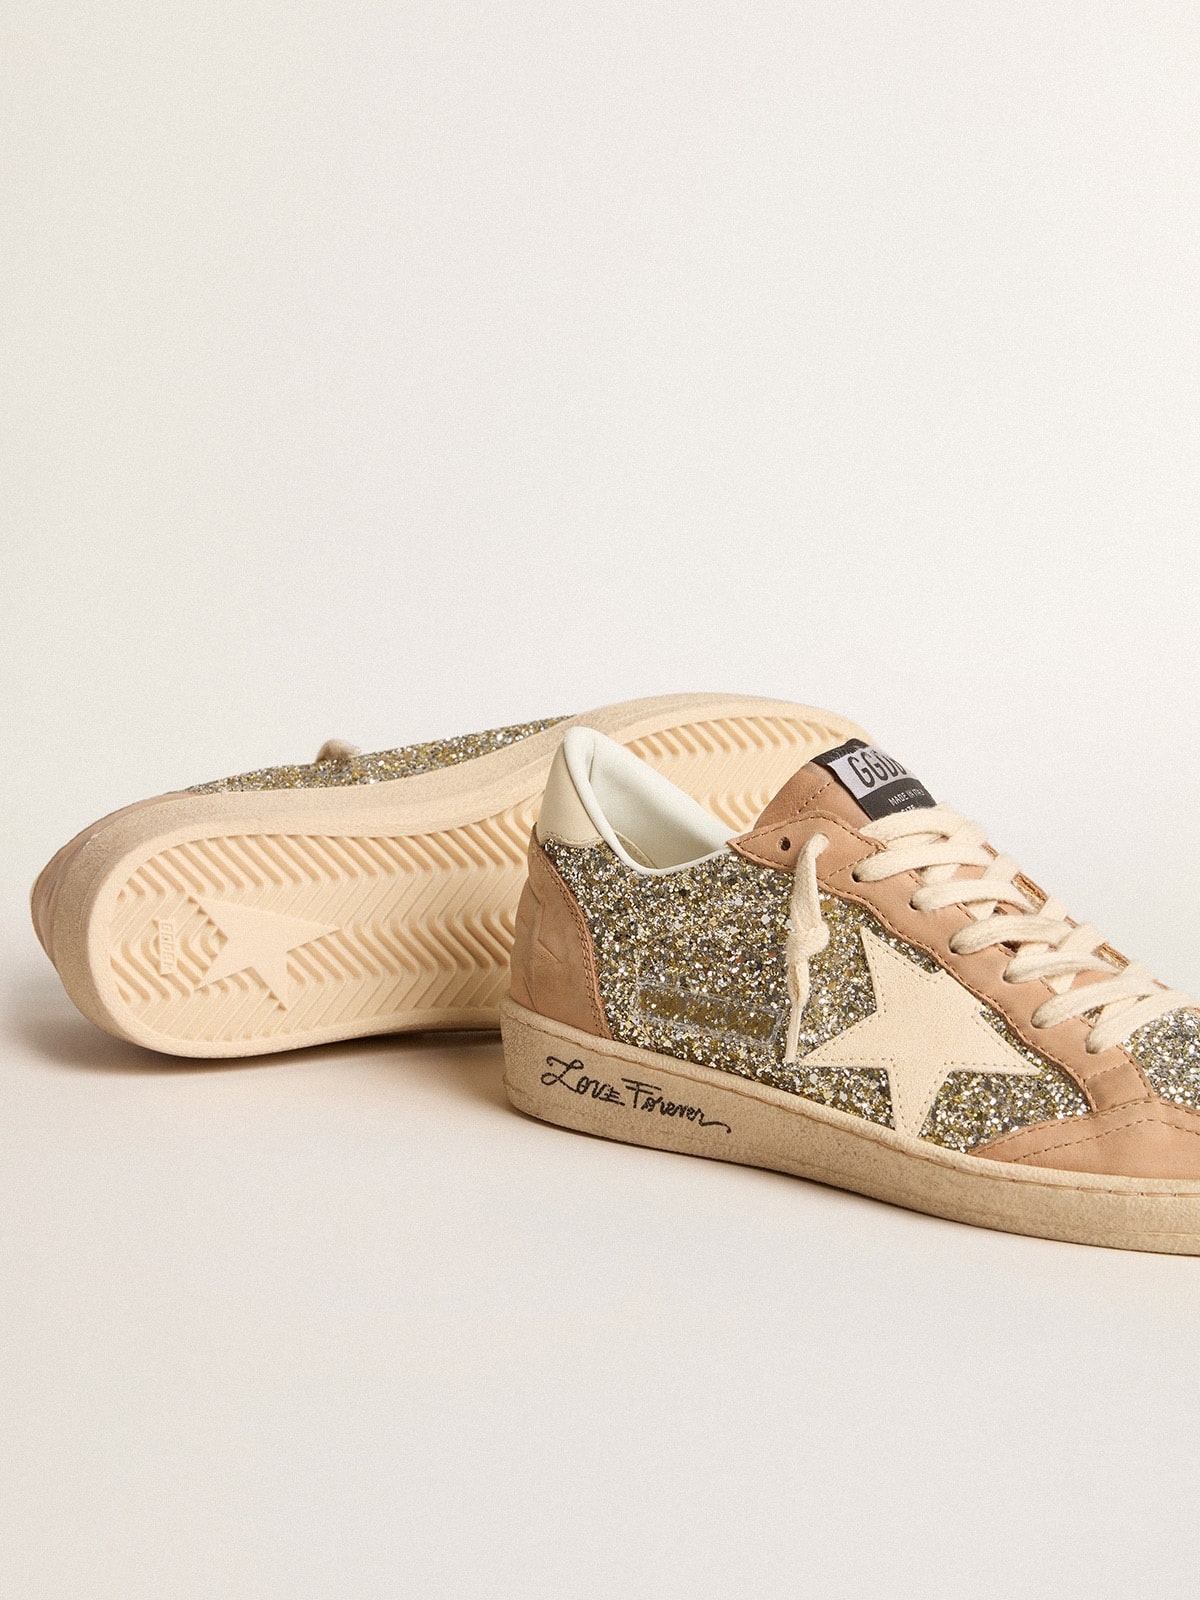 Ball Star in platinum glitter with cream leather star and nubuck toe - 3